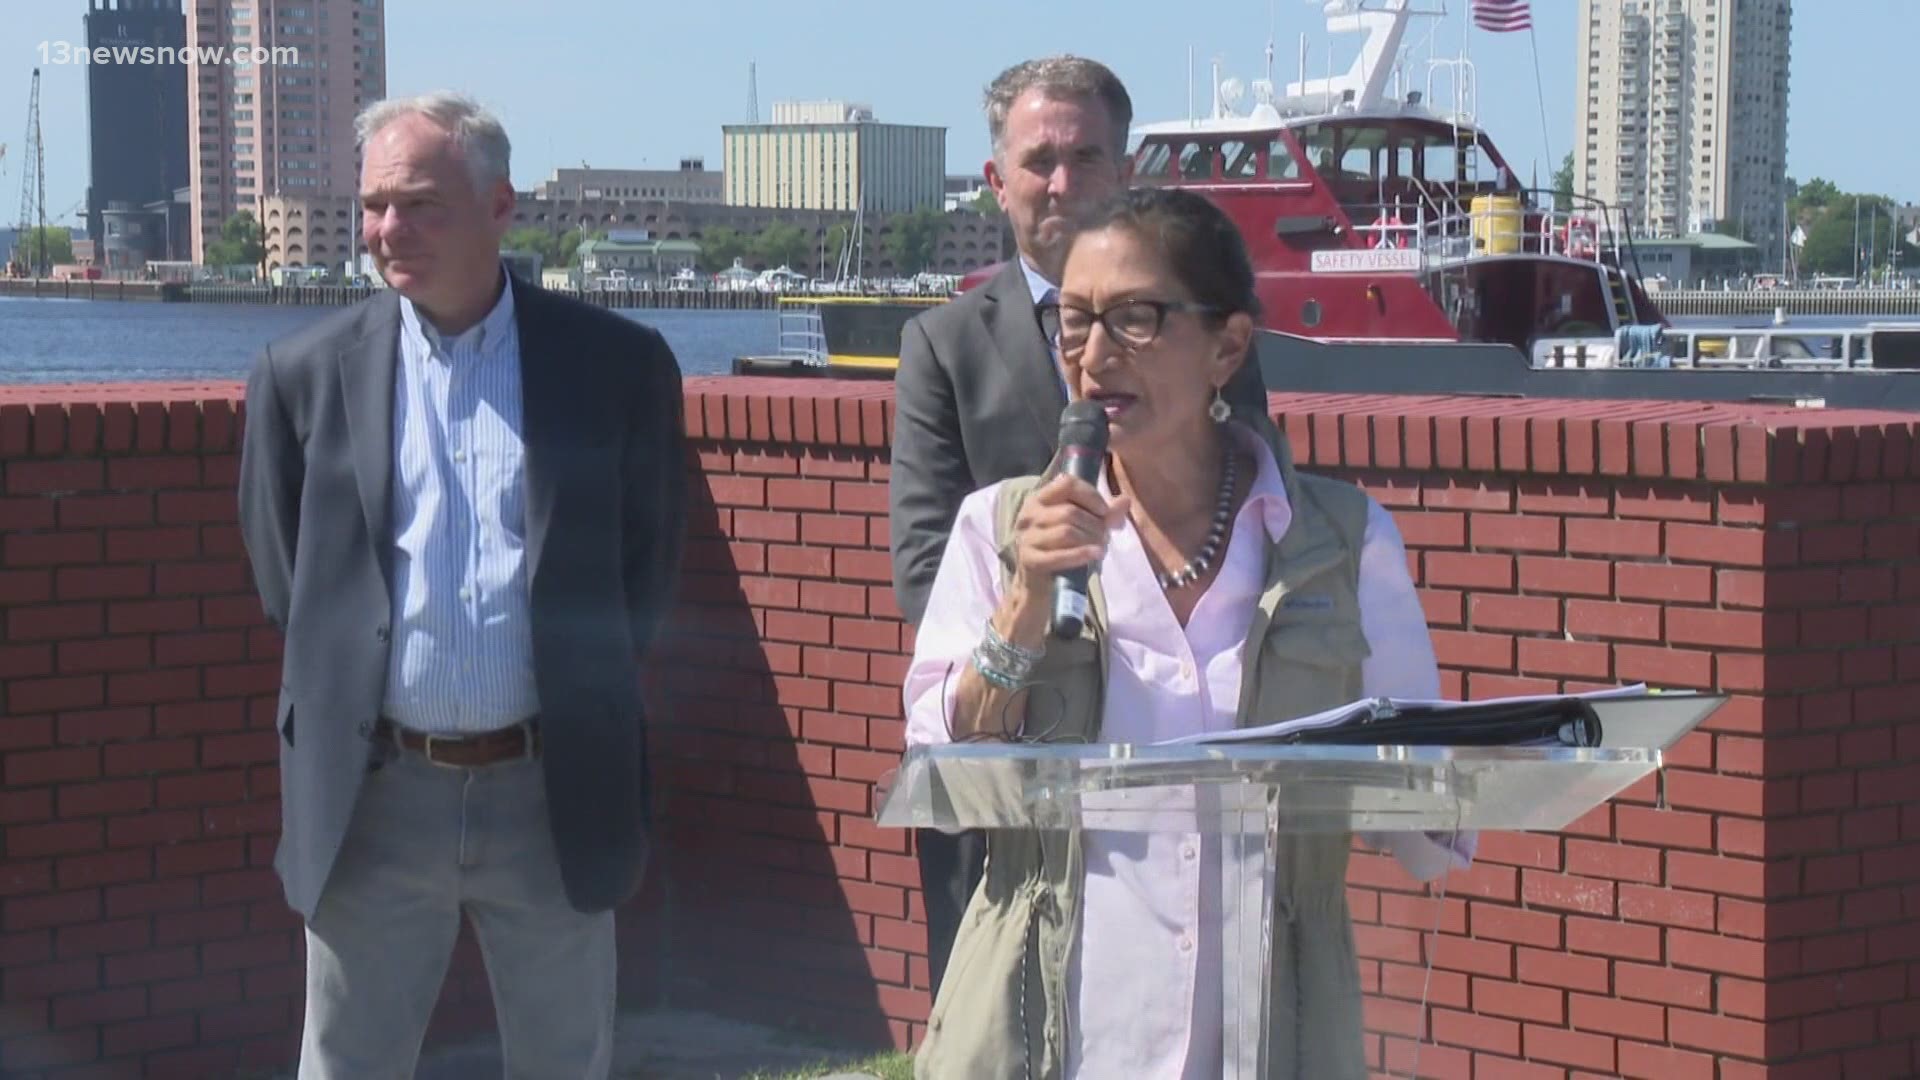 The Sec. of the Interior said the demand for offshore wind energy is at a peak. She and Gov. Northam announced a project that could bring more turbines here.